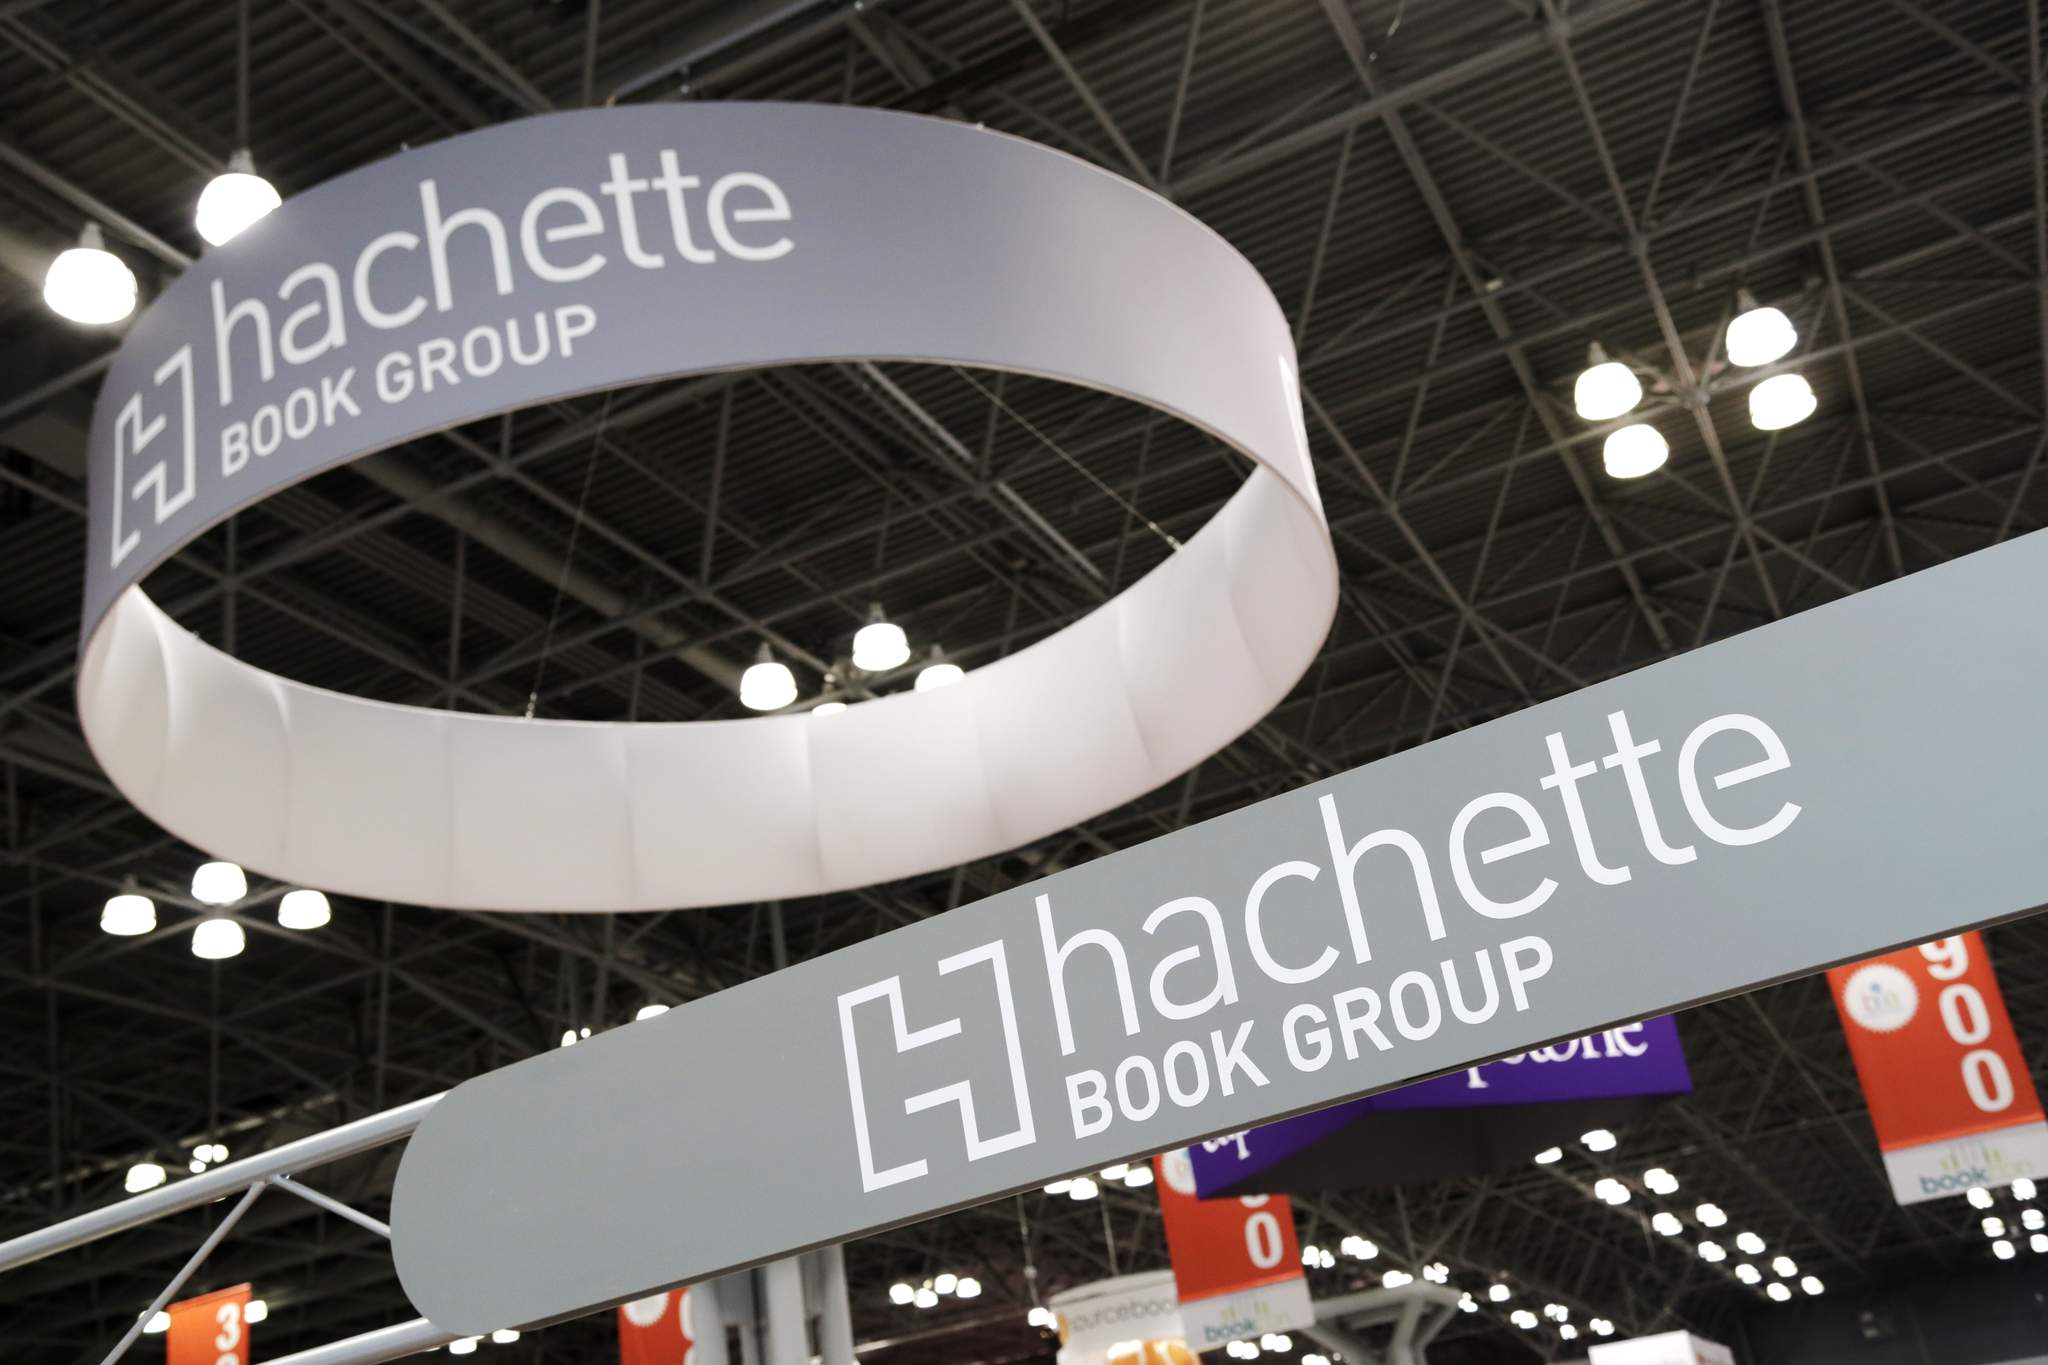 None of the 'Big Five' publishers will attend BookExpo